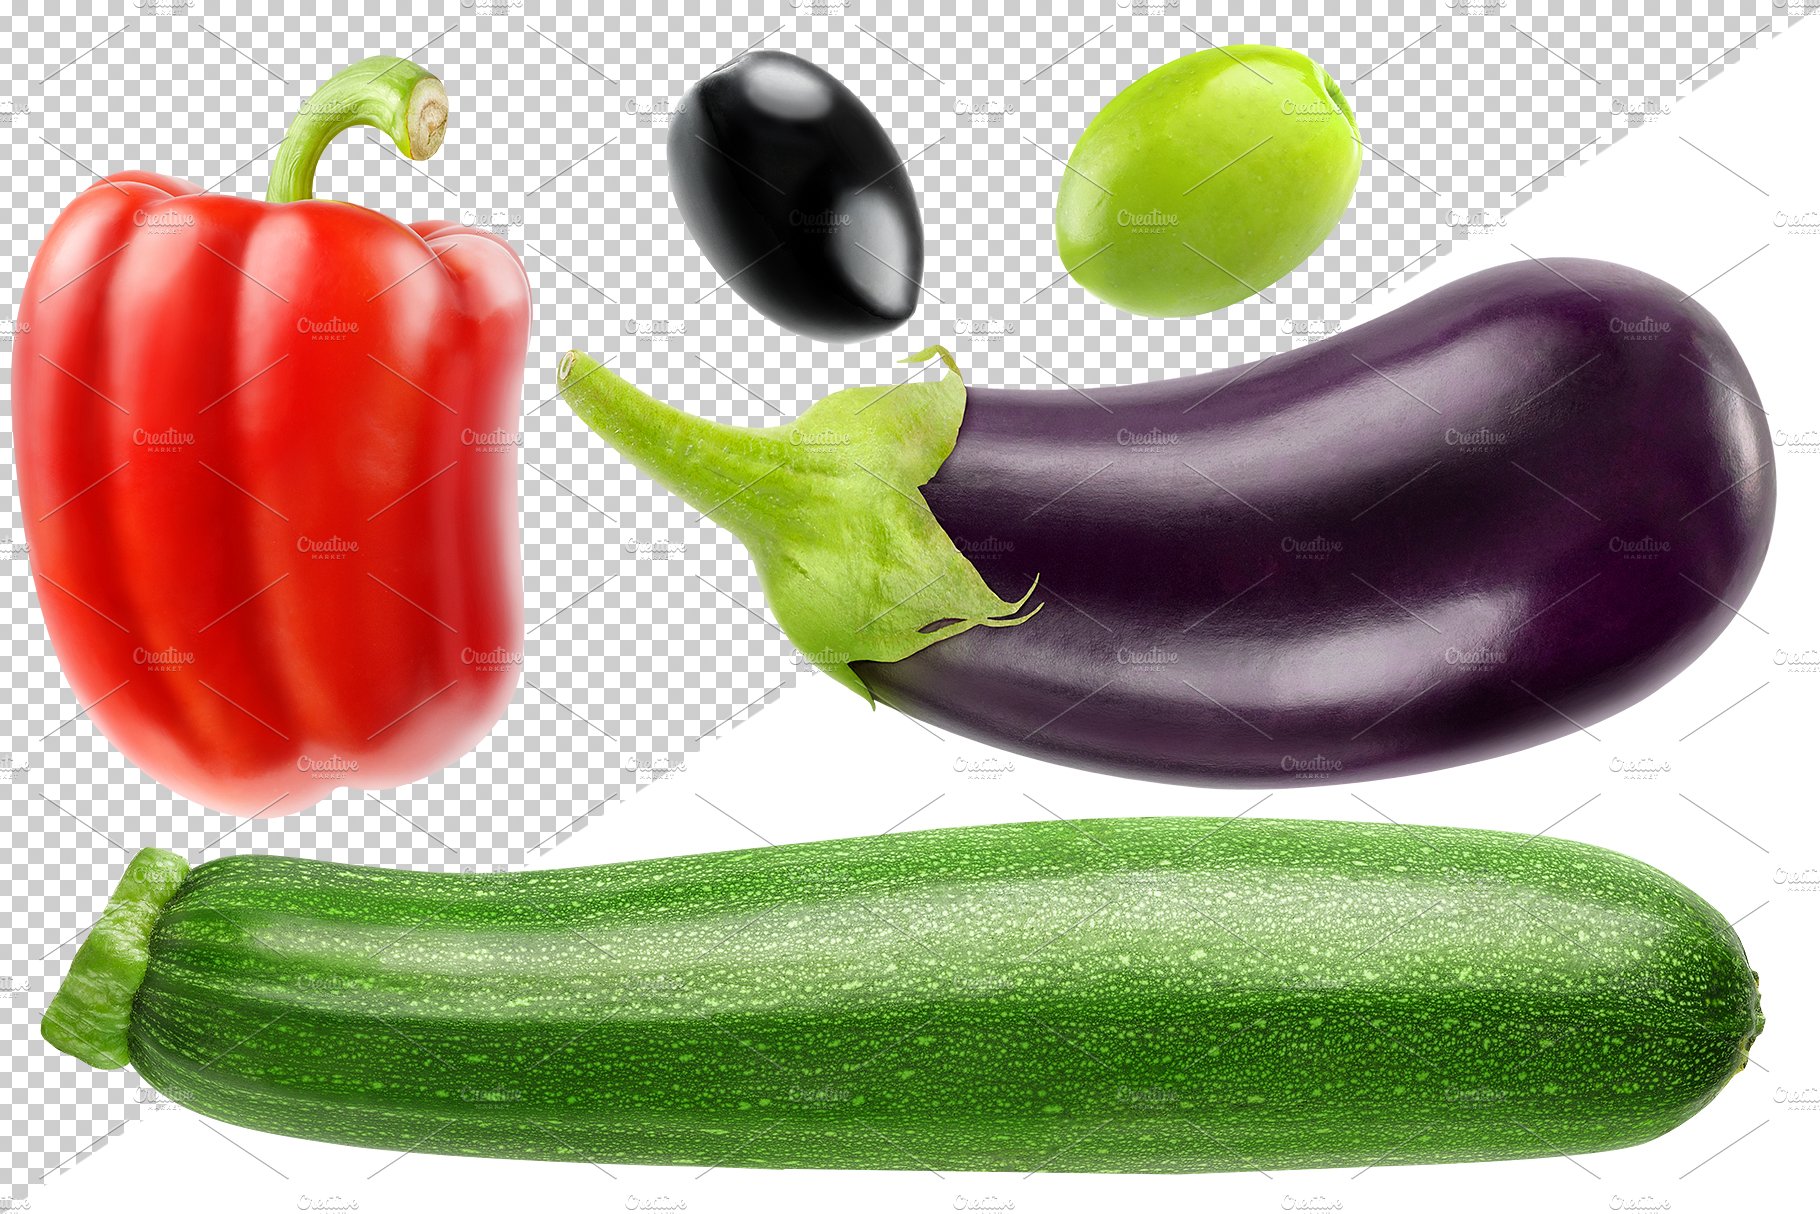 20 fresh vegetables preview image.